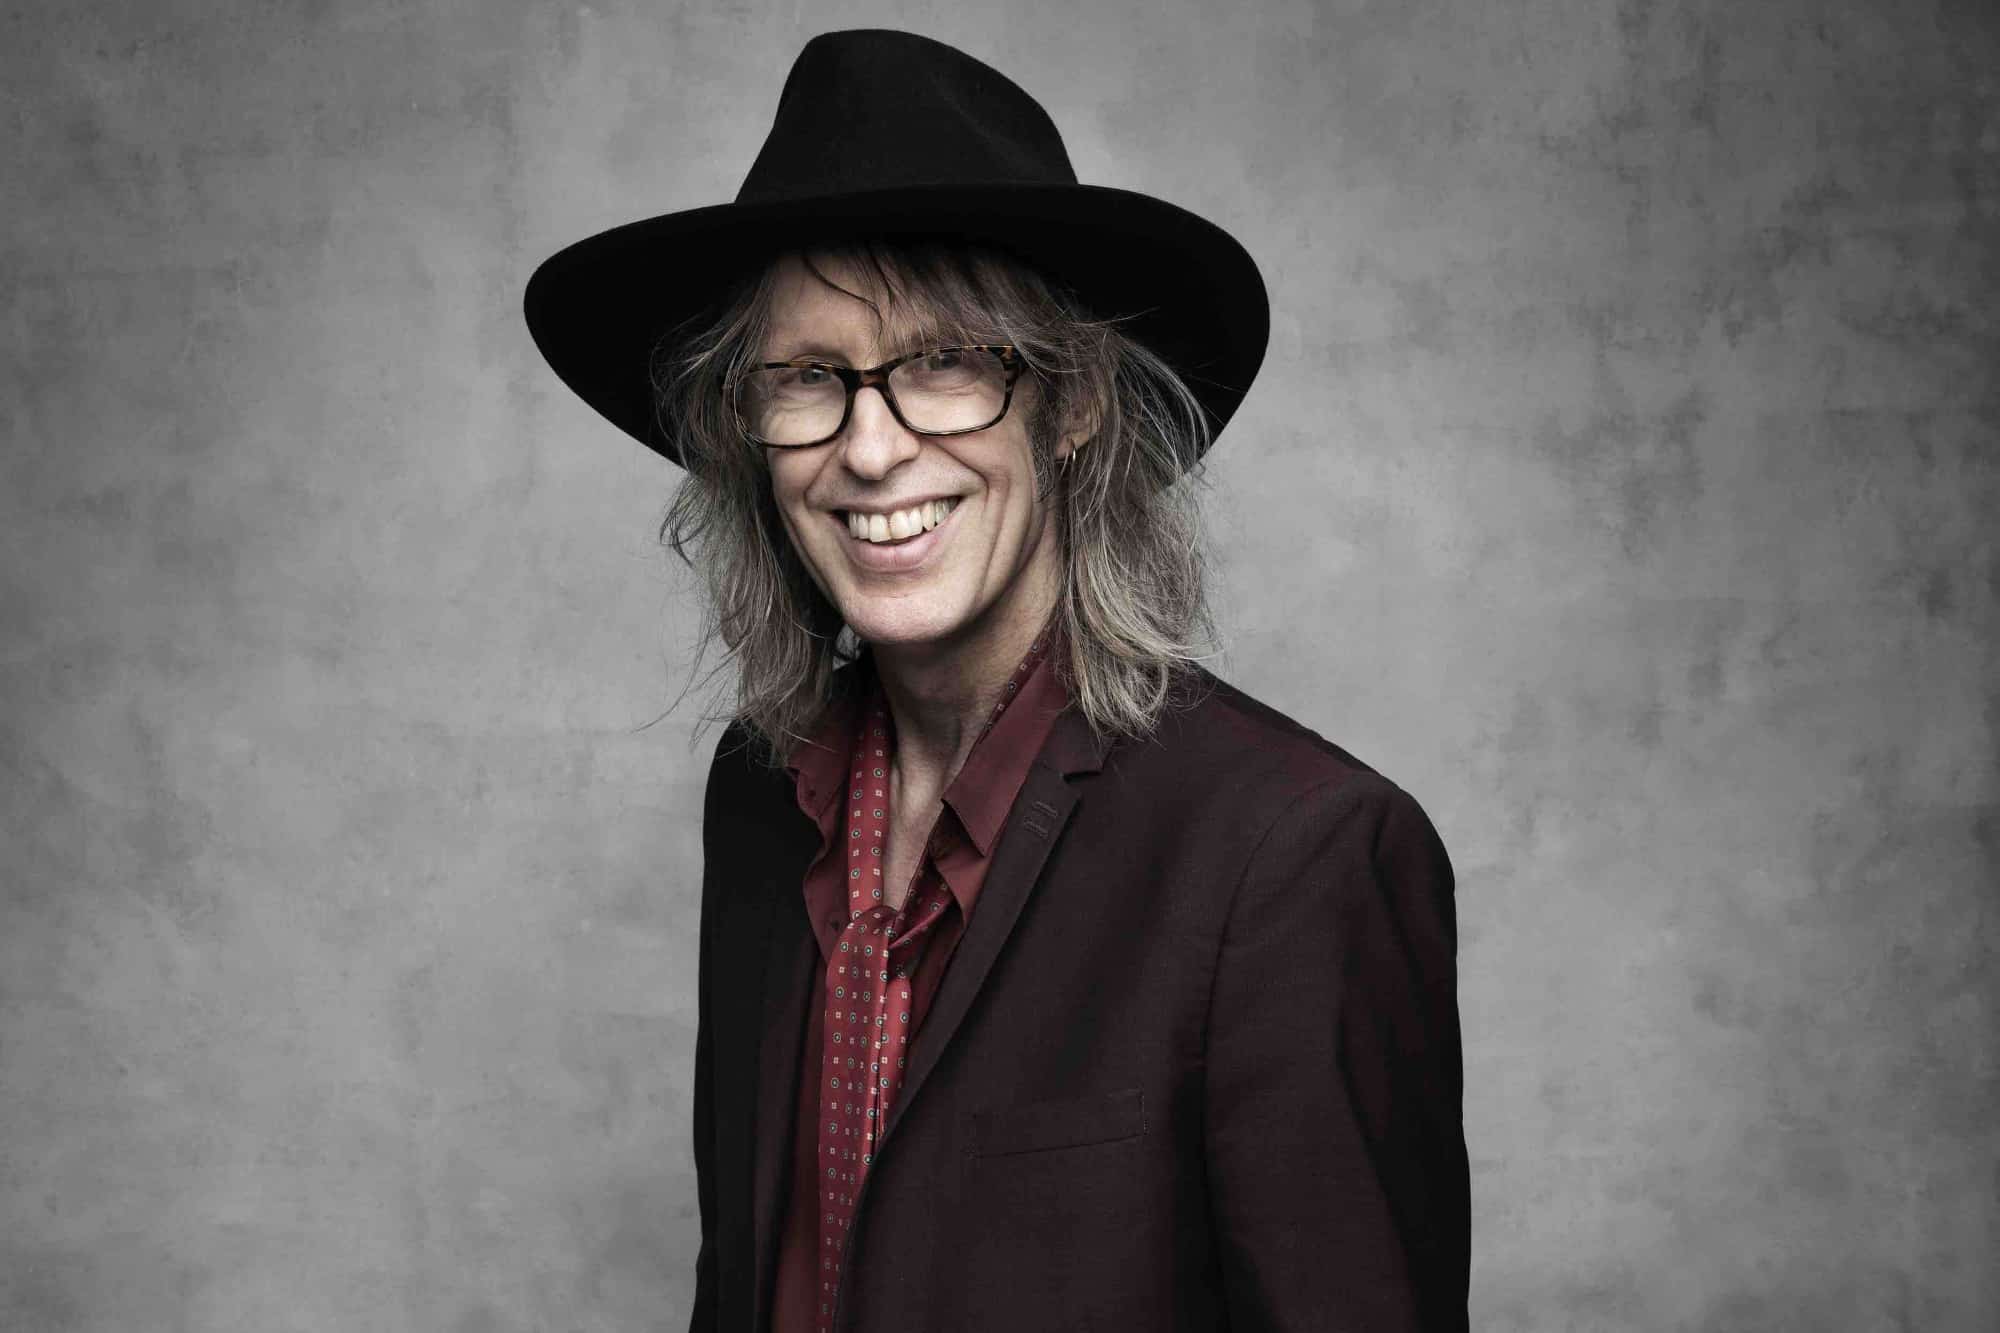 Mike Scott Of The Waterboys On “The Soul Singer” And ‘Seeker’